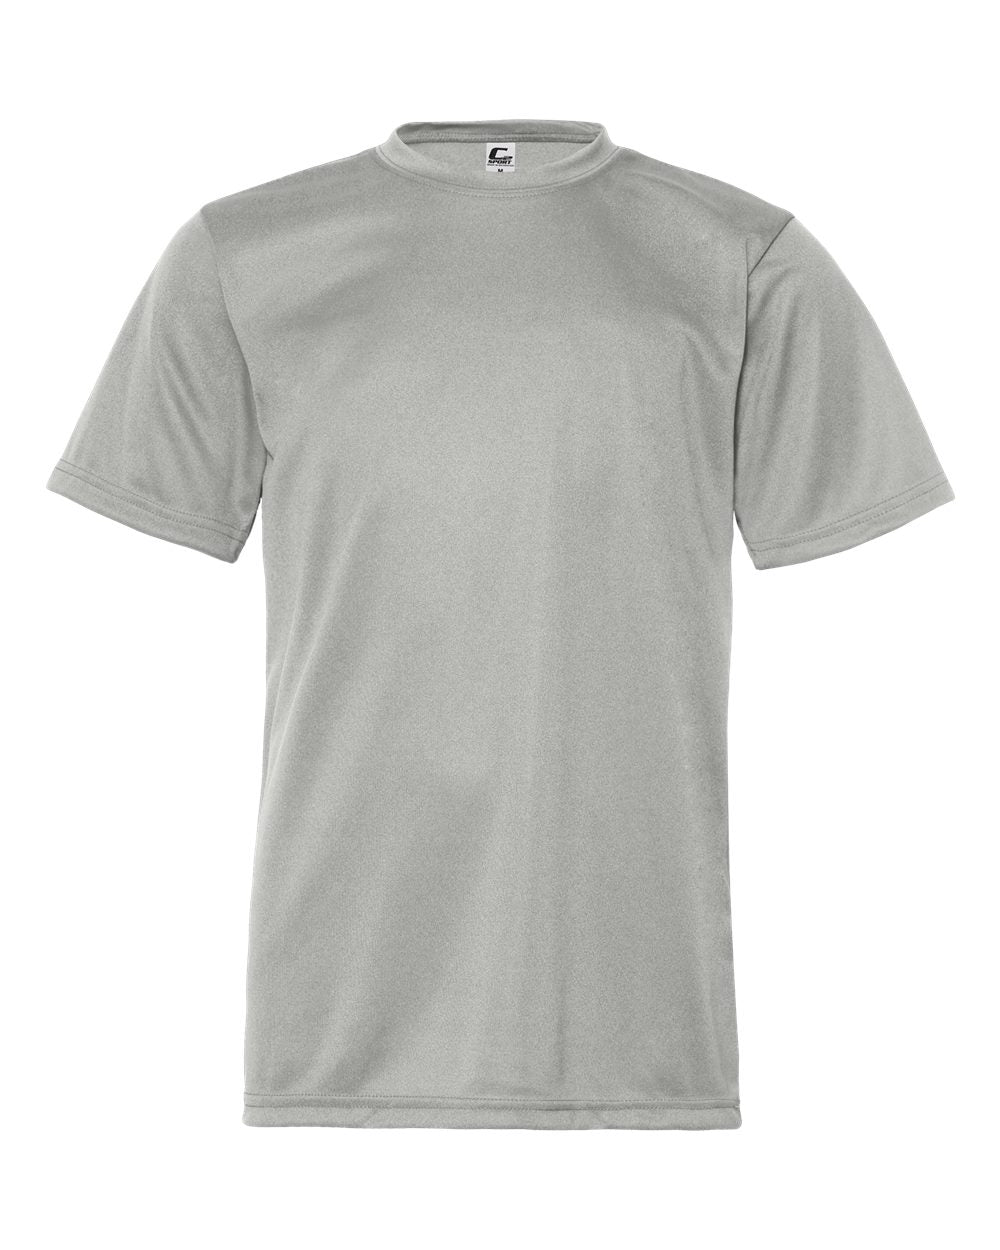 C2 Sport Youth Performance T-Shirt 5200 #color_Silver